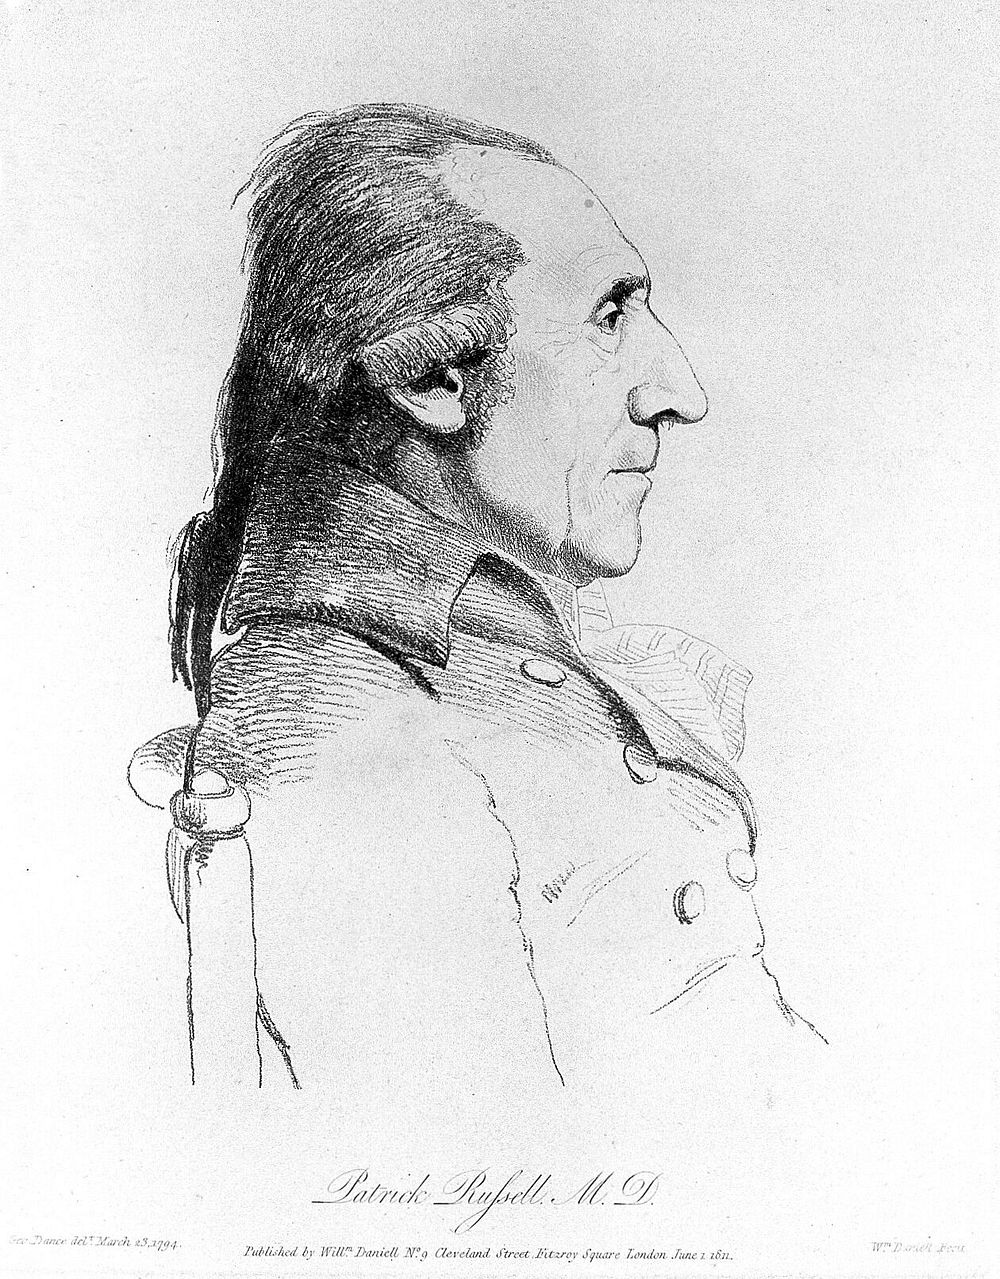 Patrick Russell. Soft-ground etching by W. Daniell, 1811, after G. Dance, 1794.